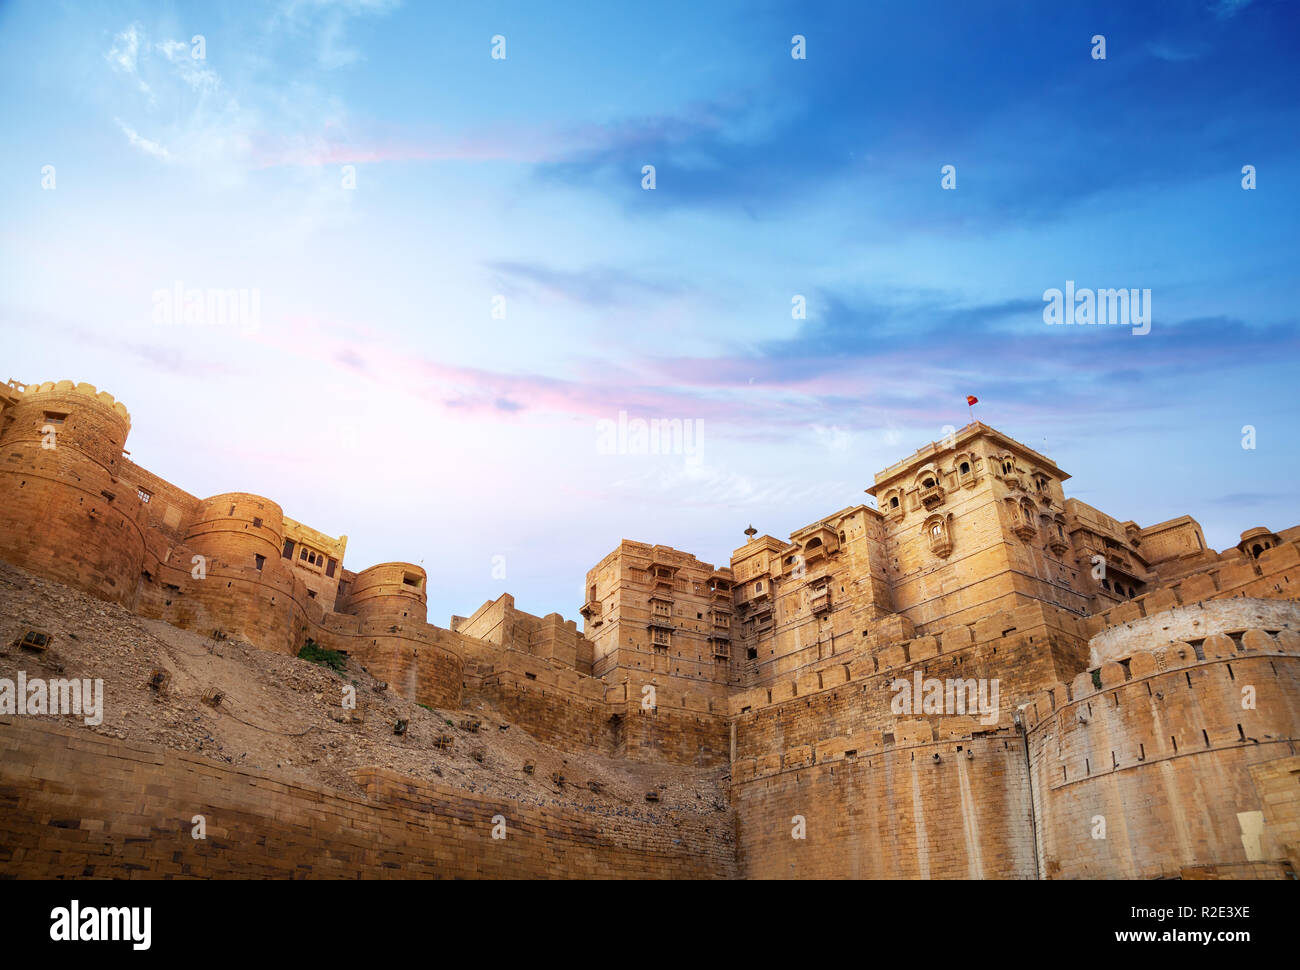 Jaisalmer fort wall at sunrise blue sky in Rajasthan, India Stock Photo